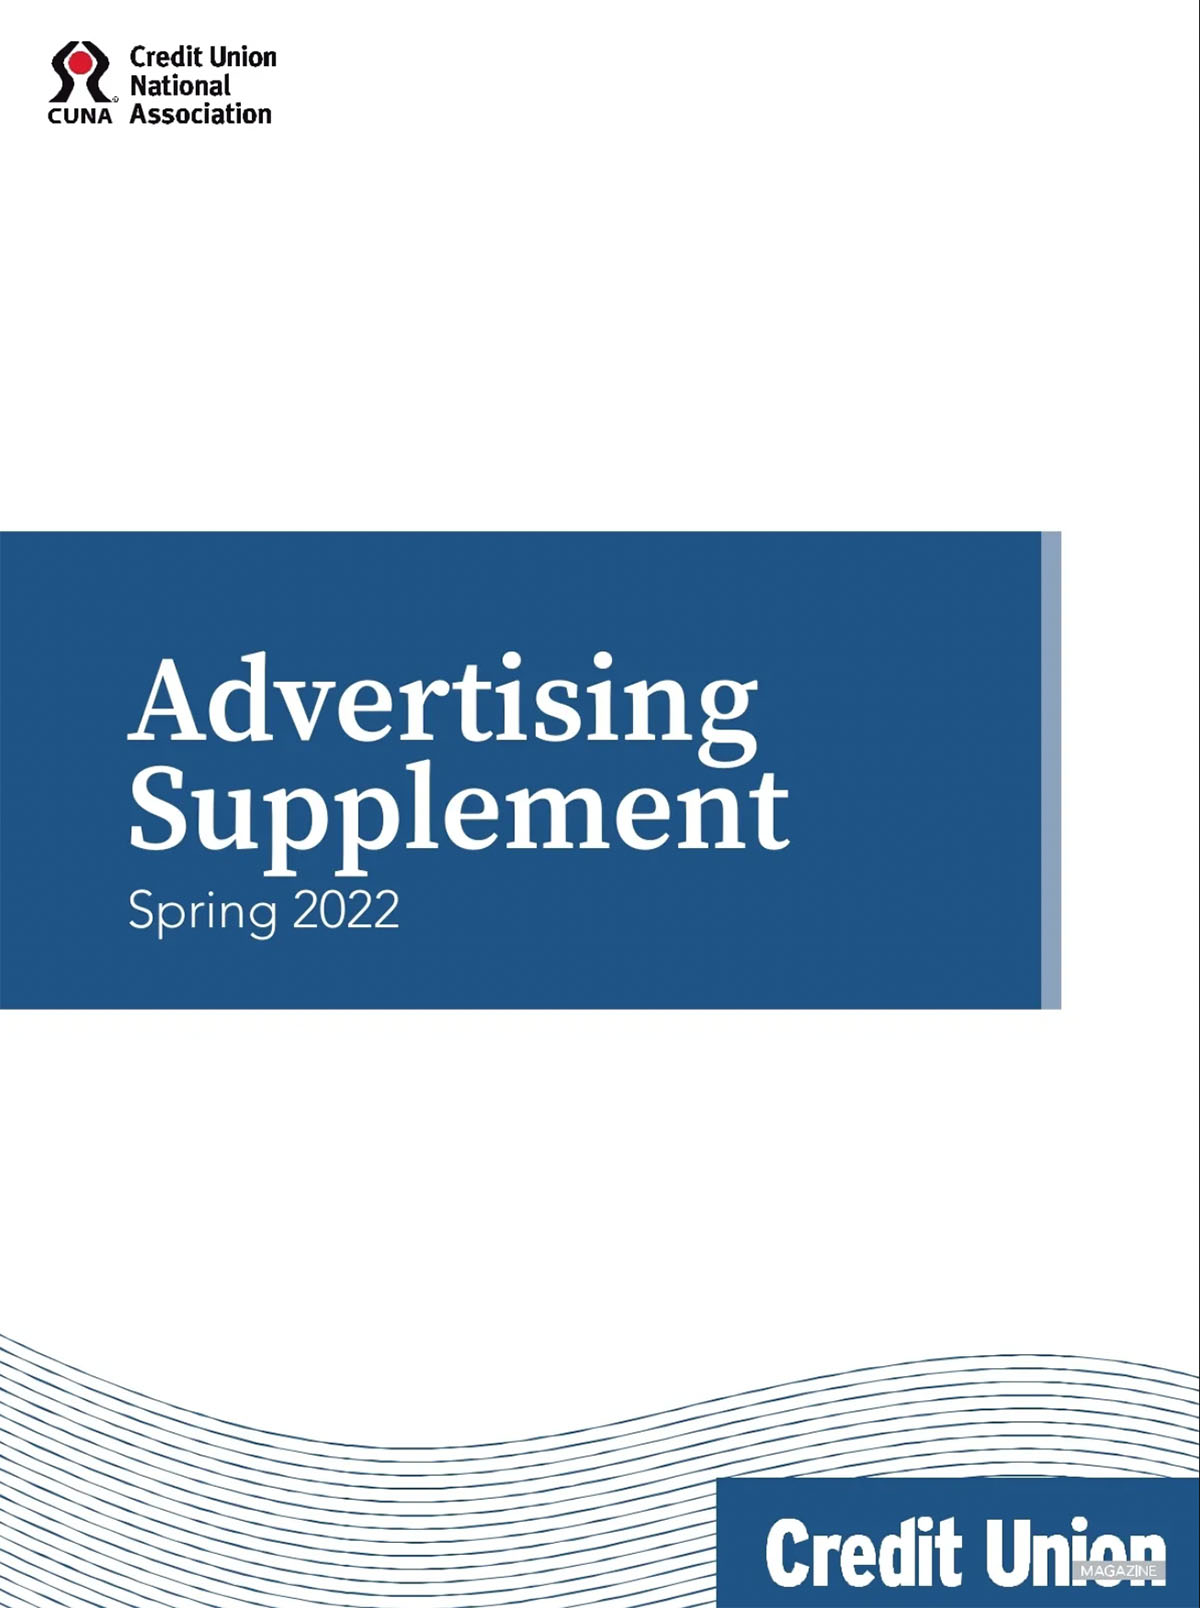 Ad Supplement Spring 2022